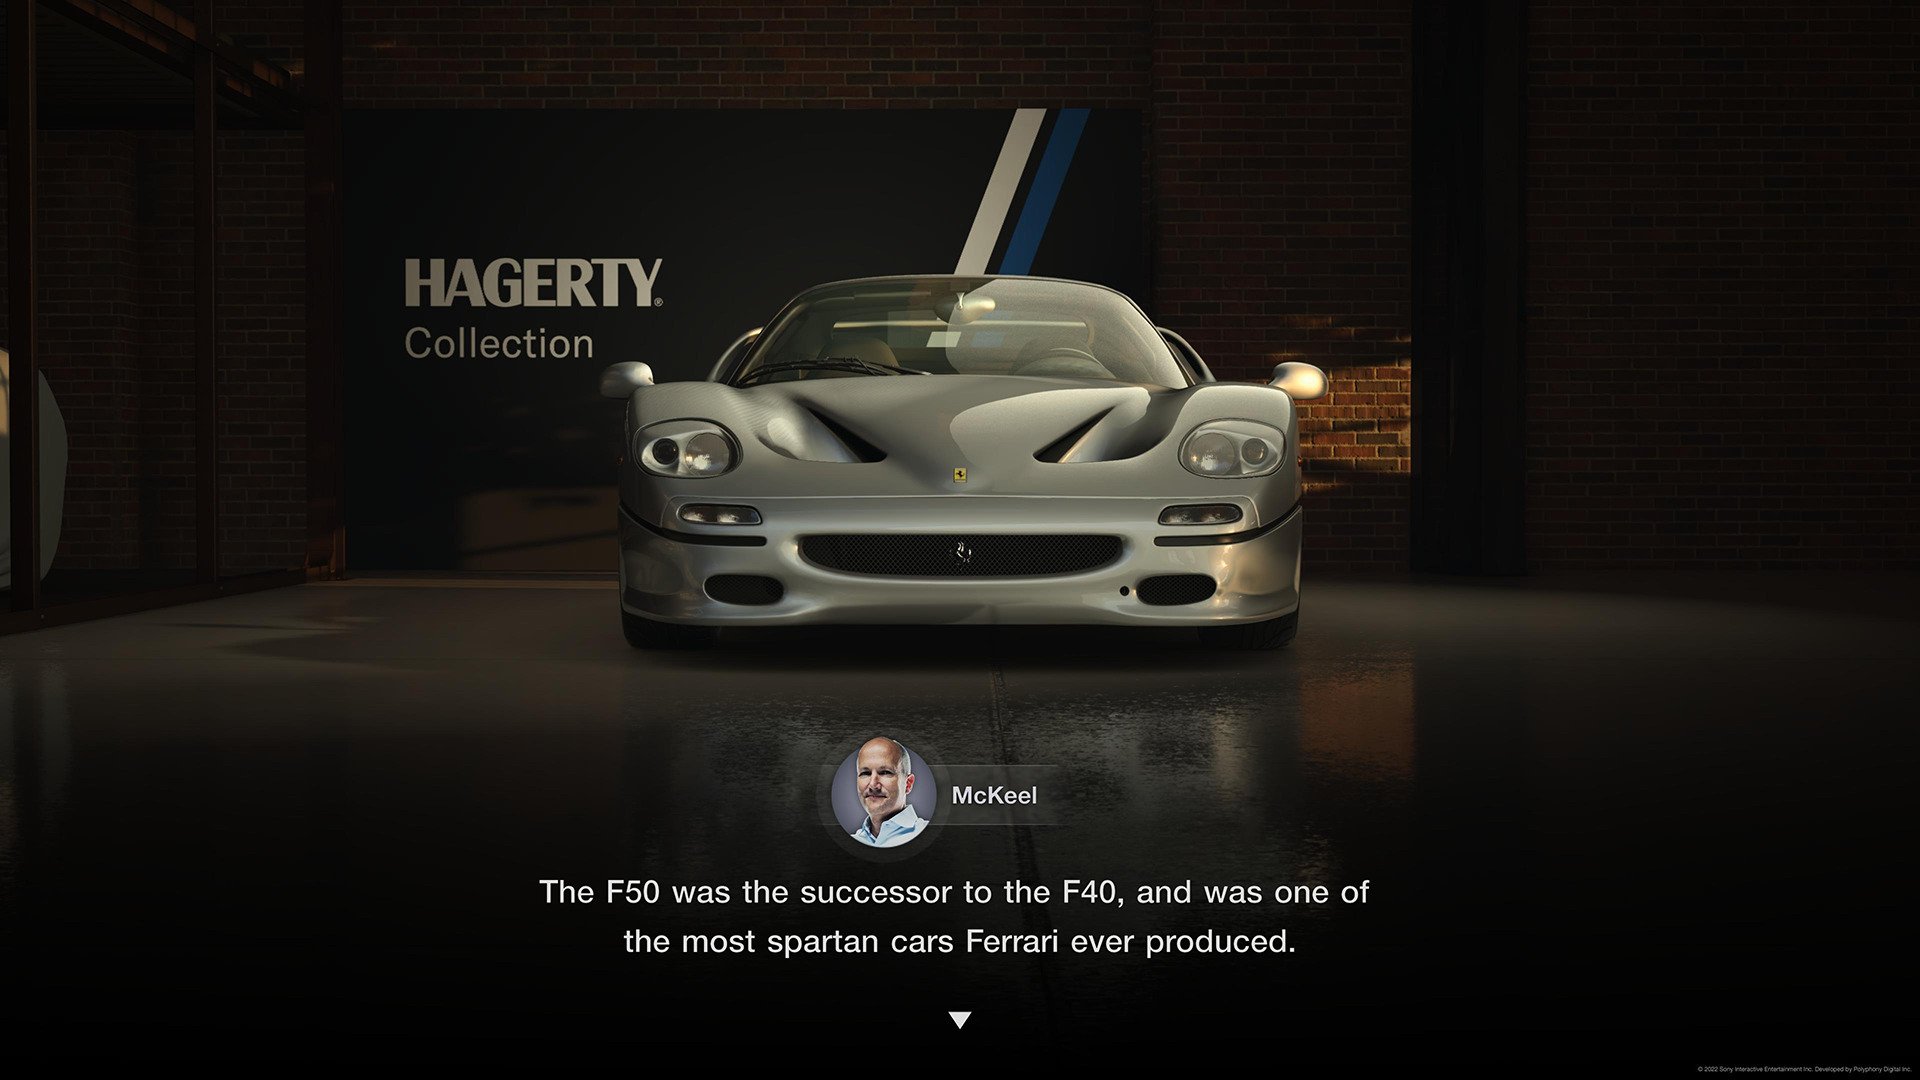 Gran Turismo 7 “Legend Cars” Will Be Dynamically Priced by Hagerty